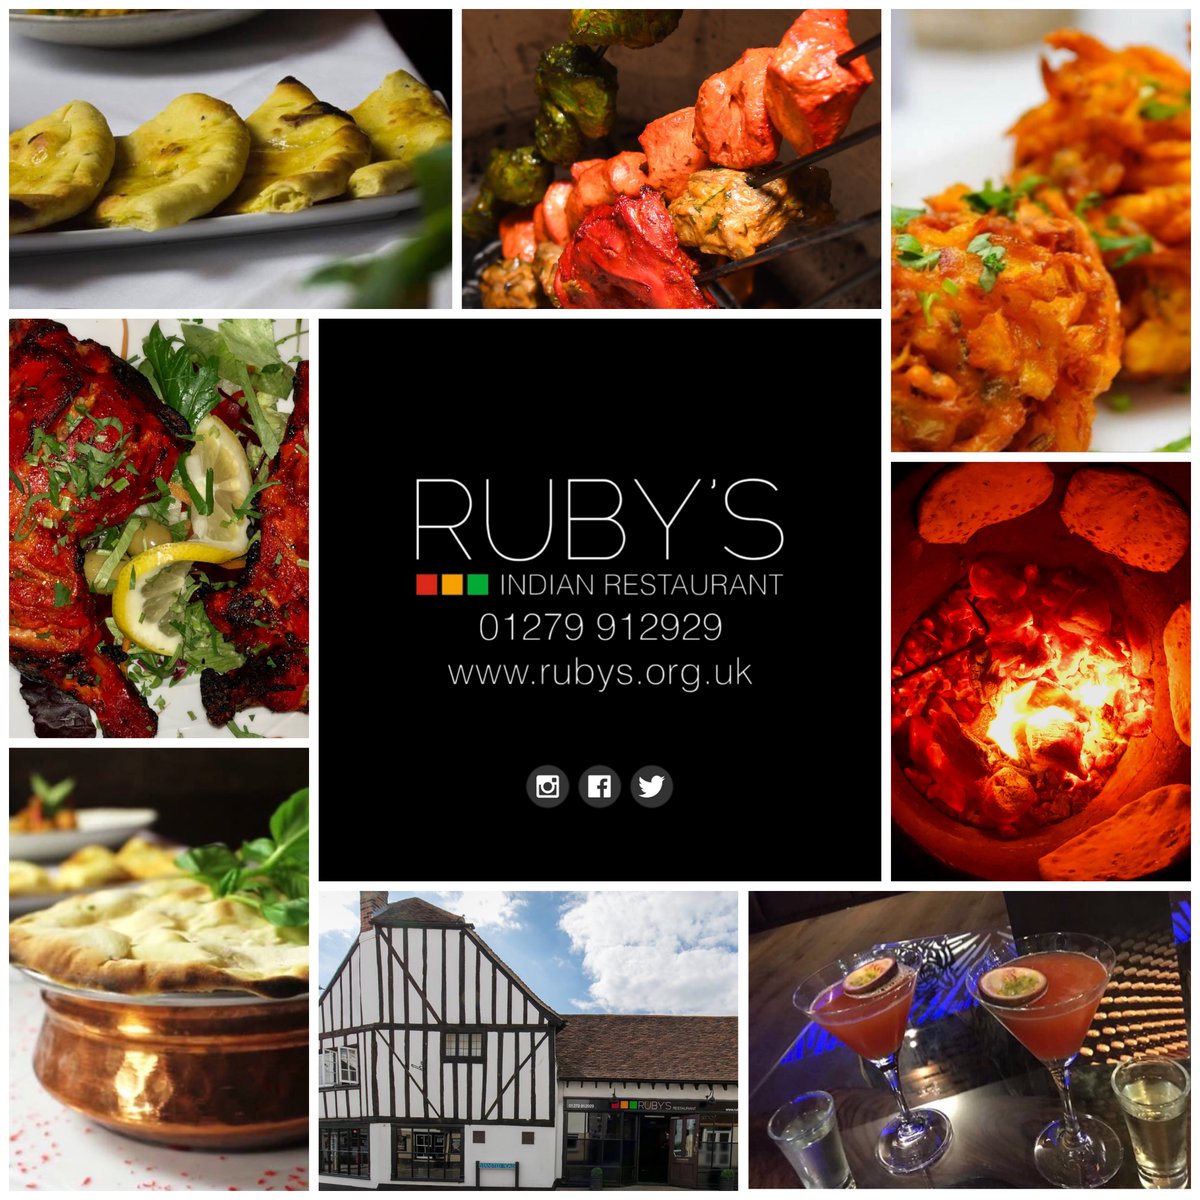 Visit Ruby’s Indian Restaurant in Bishop’s Stortford for a totally authentic fine dining experience! 🤩🍛🥘🌶️🍷

Book your table online now!👇🏽
rubys.org.uk/book-a-table.h…

#rubysrestaurant #finedining #indiancuisine #familyrestaurant #bishopsstortford